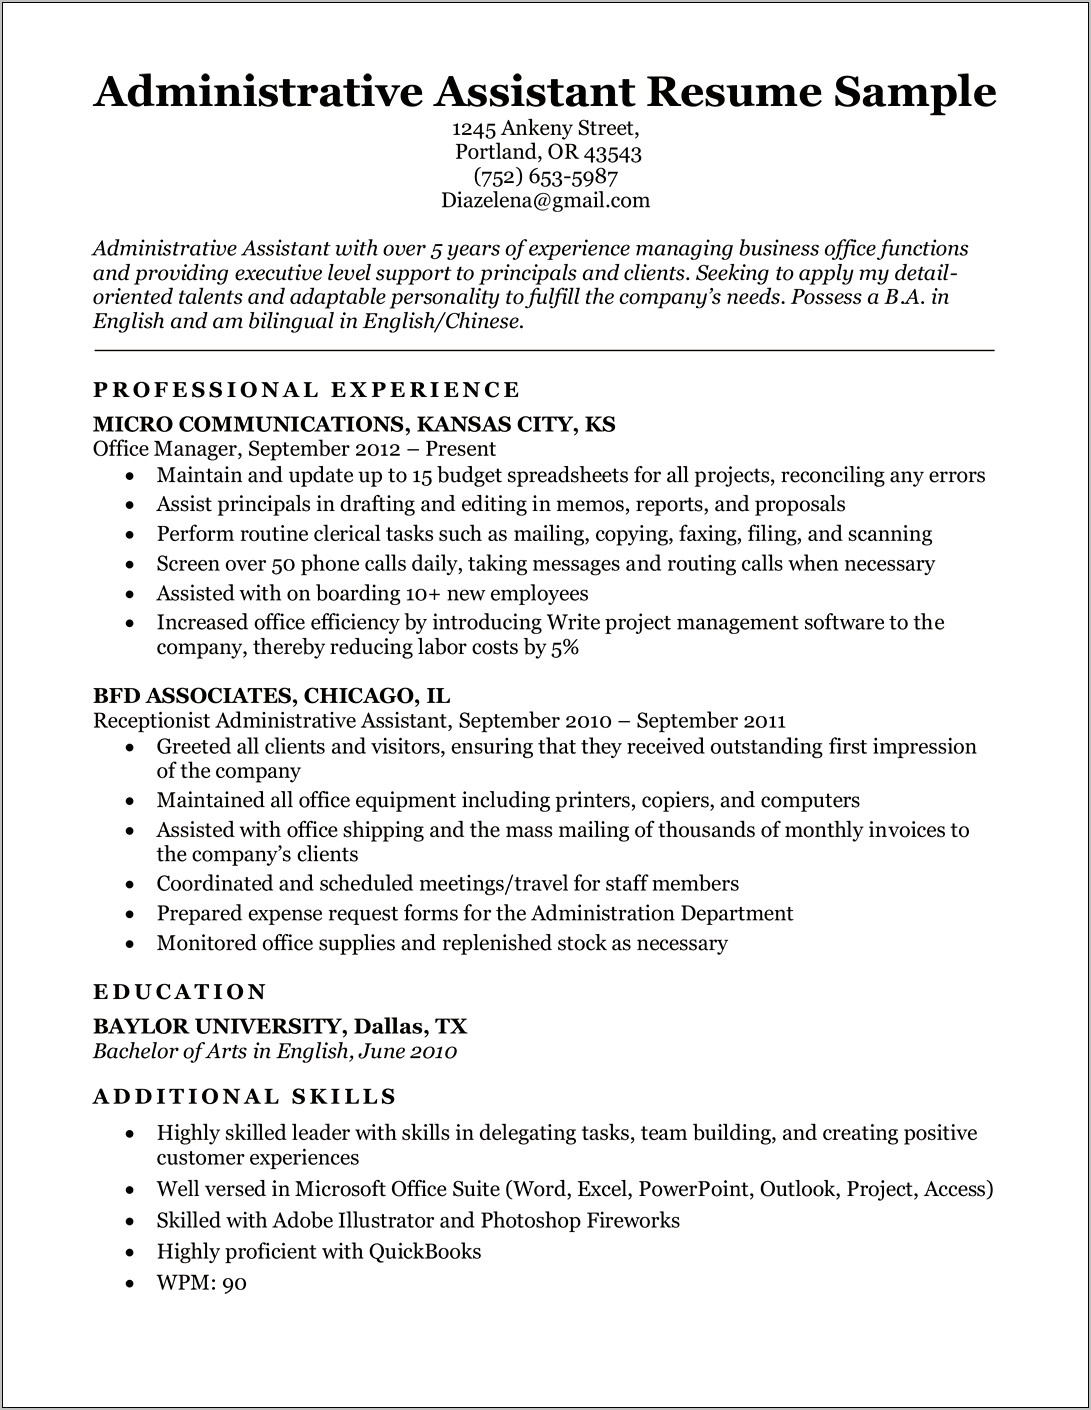 Resume To Get An Office Job